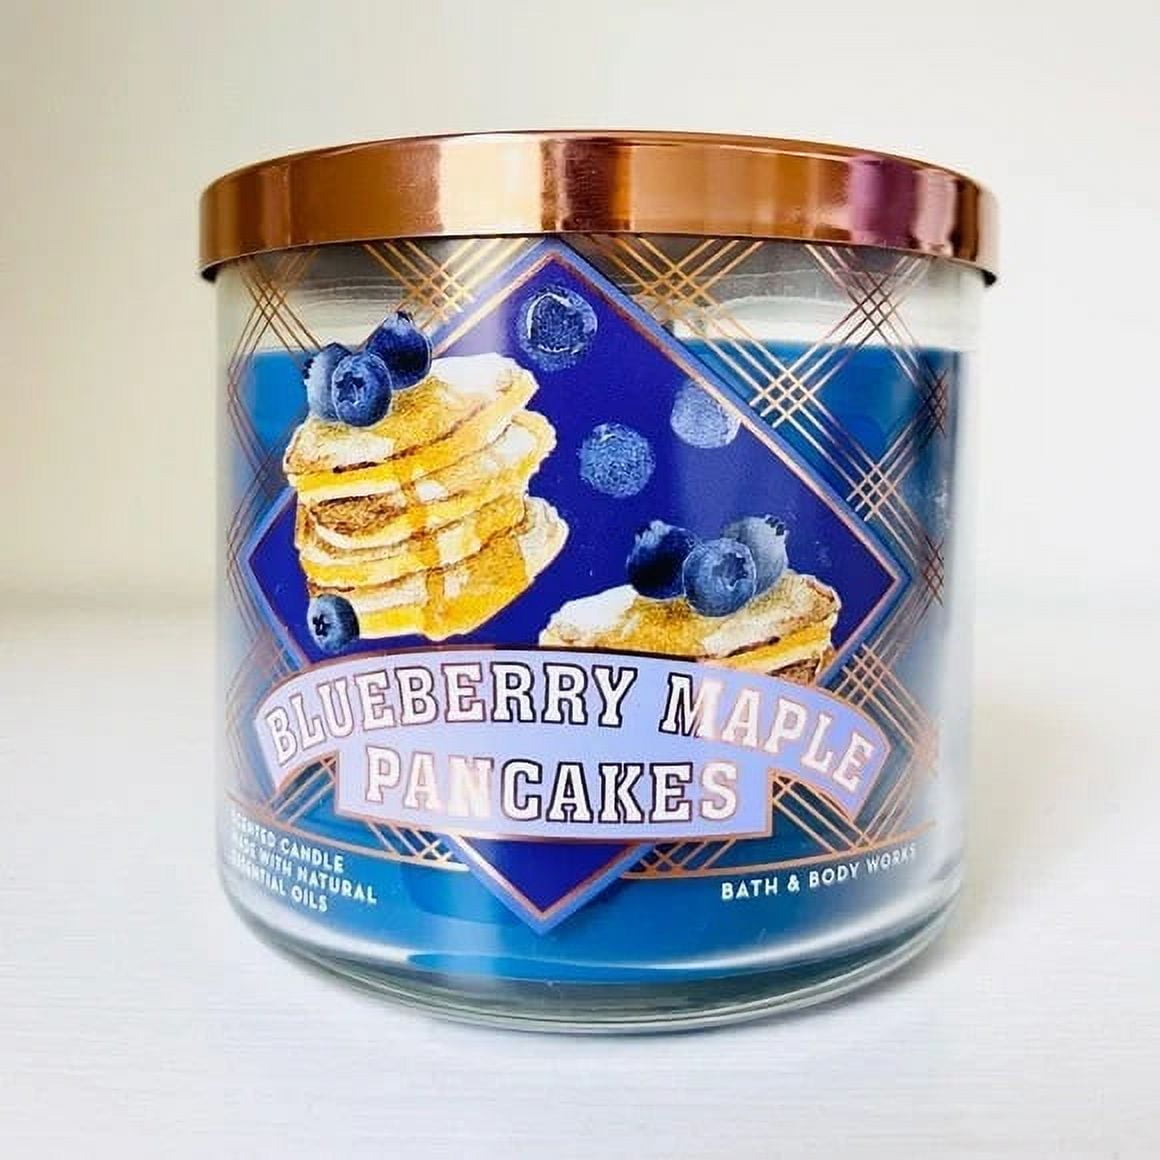 Granny's Blueberry Hotcakes Candles